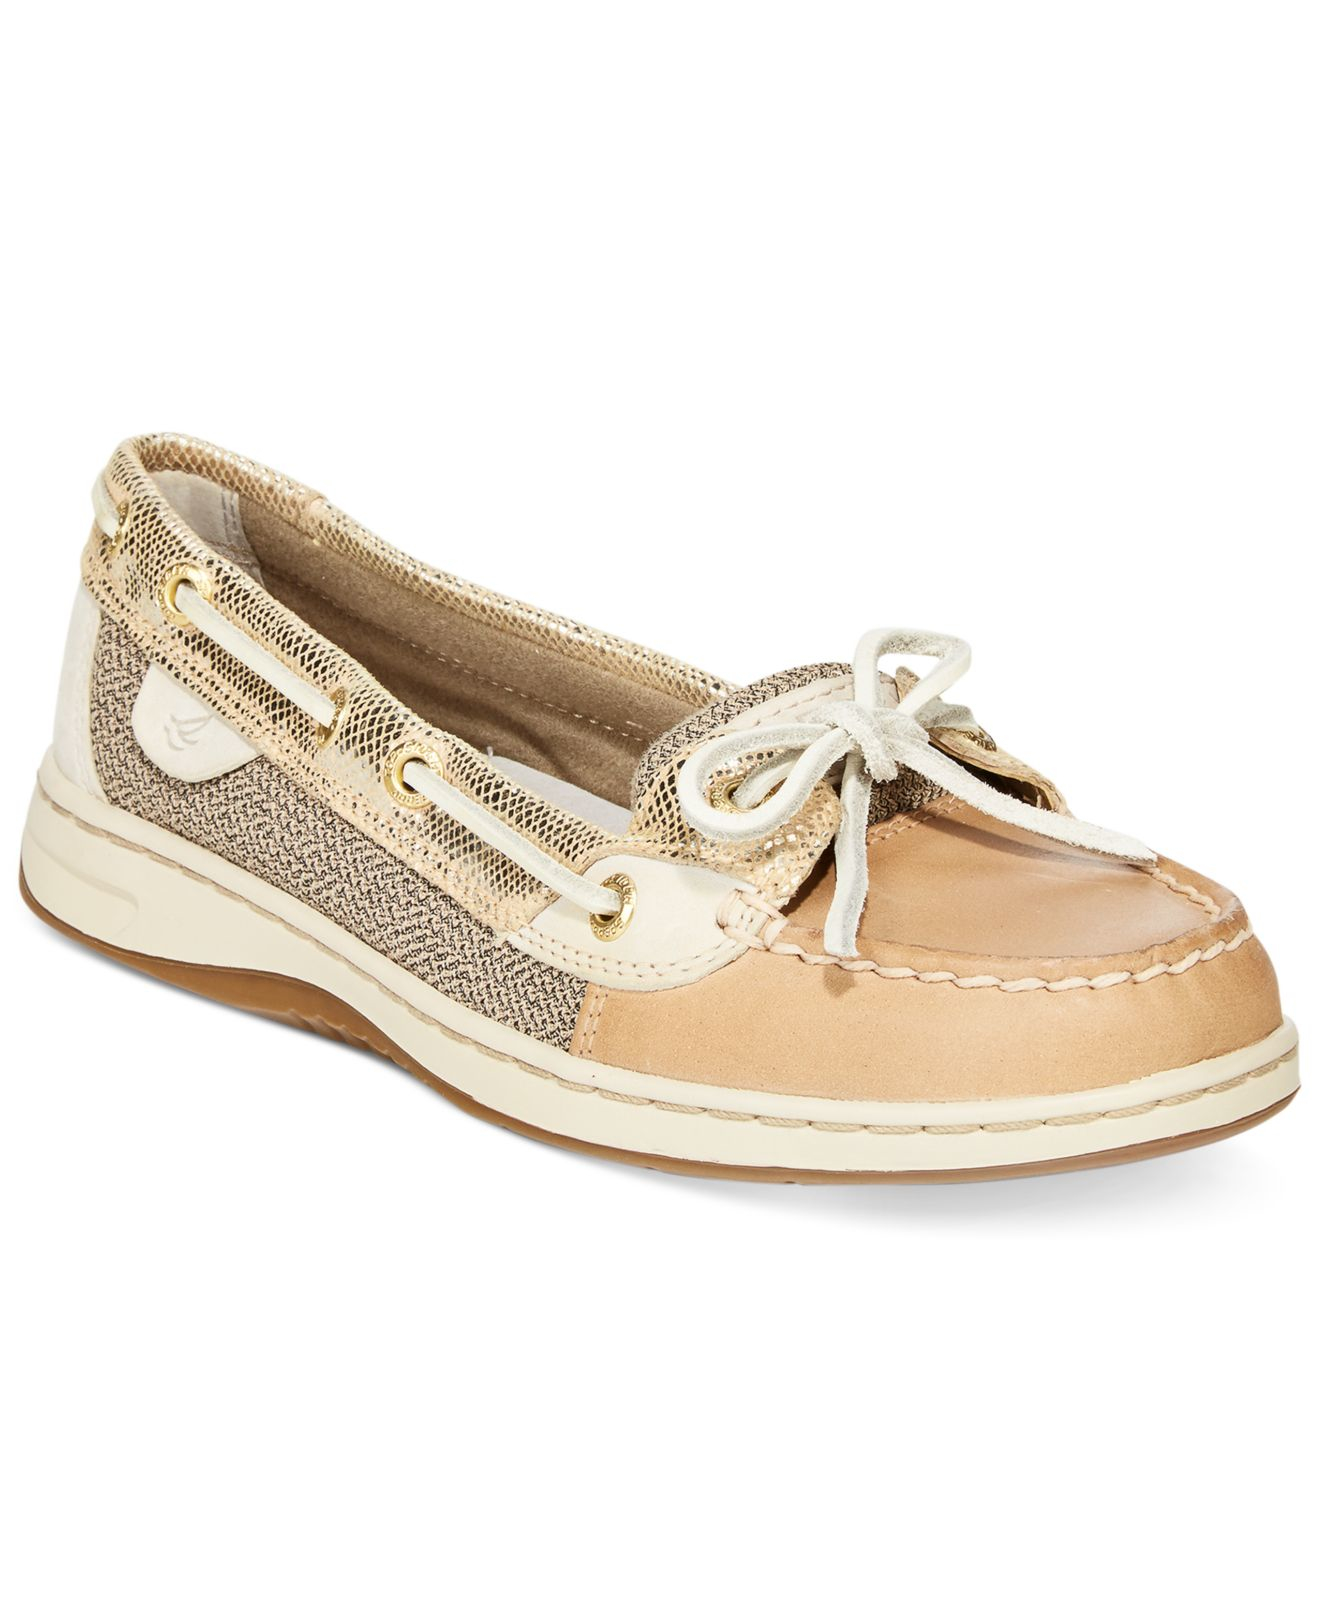 sperry metallic boat shoes